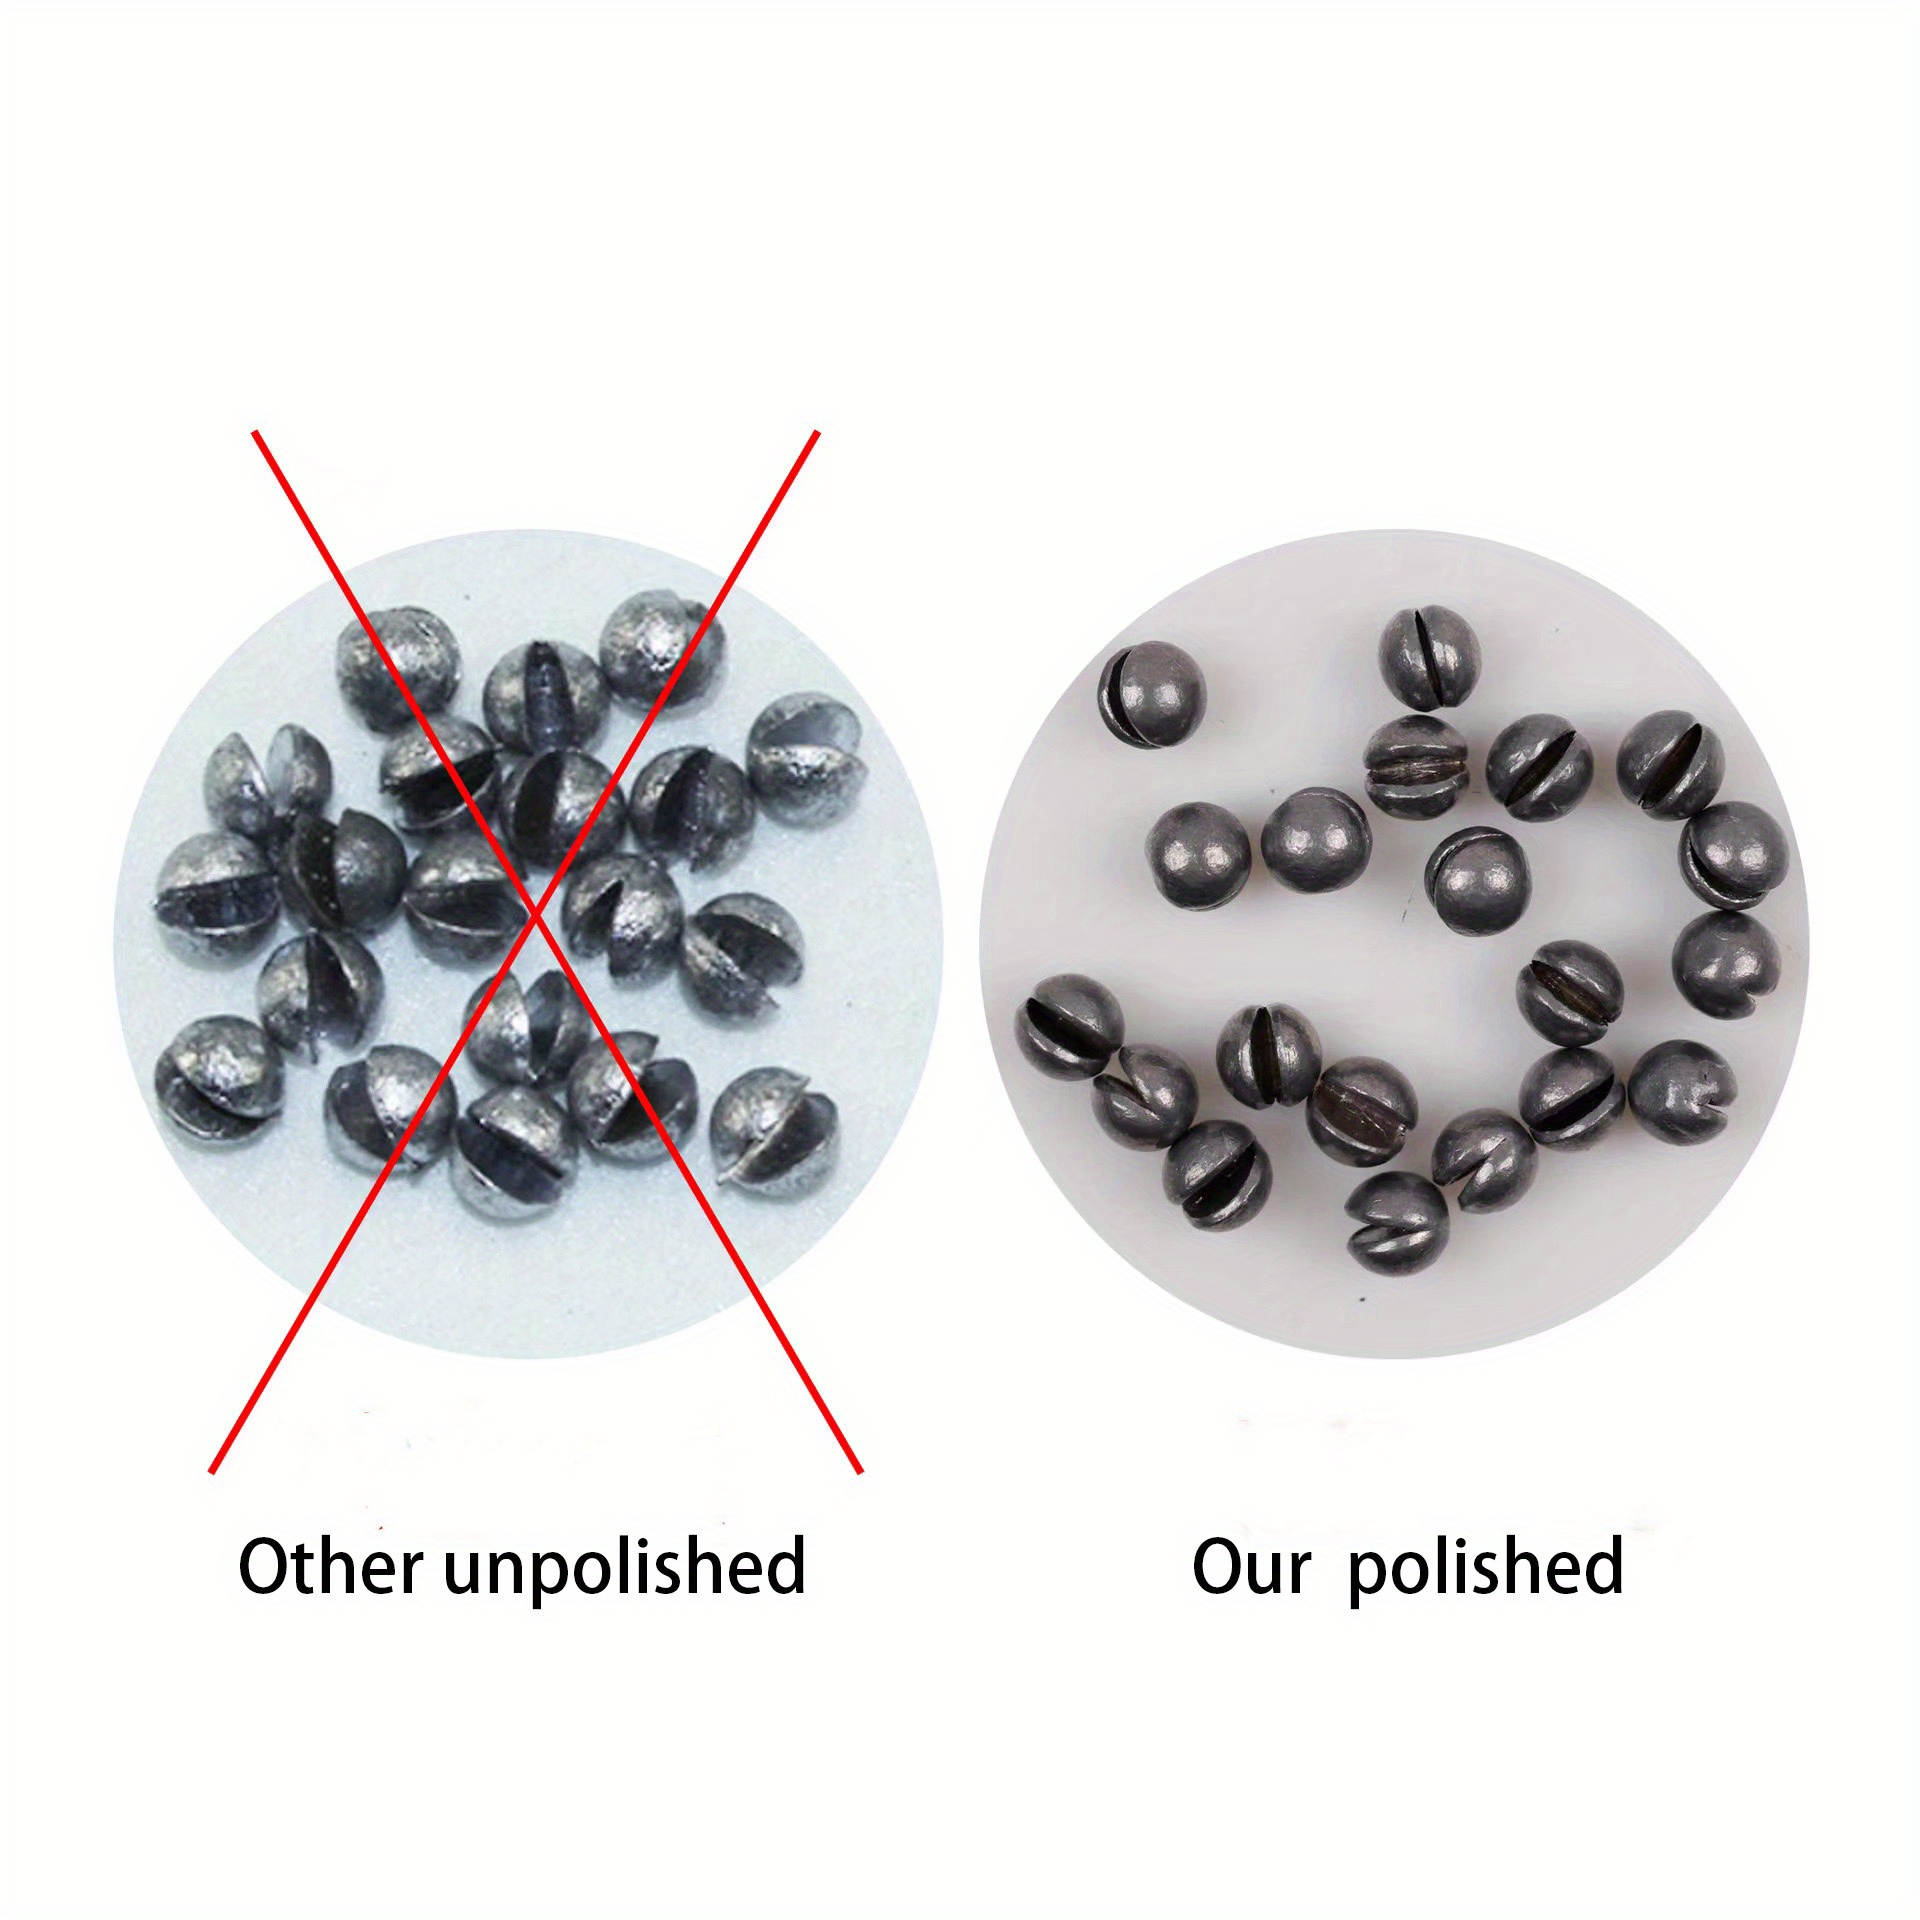 100/50pcs Fishing Weights Sinkers, Split Shot Round Removable Fishing  Sinkers, 5 Sizes Including 0.06/0.05/0.04/0.02/0.01oz (1.7/1.4/1.1/0.6/0.3g)